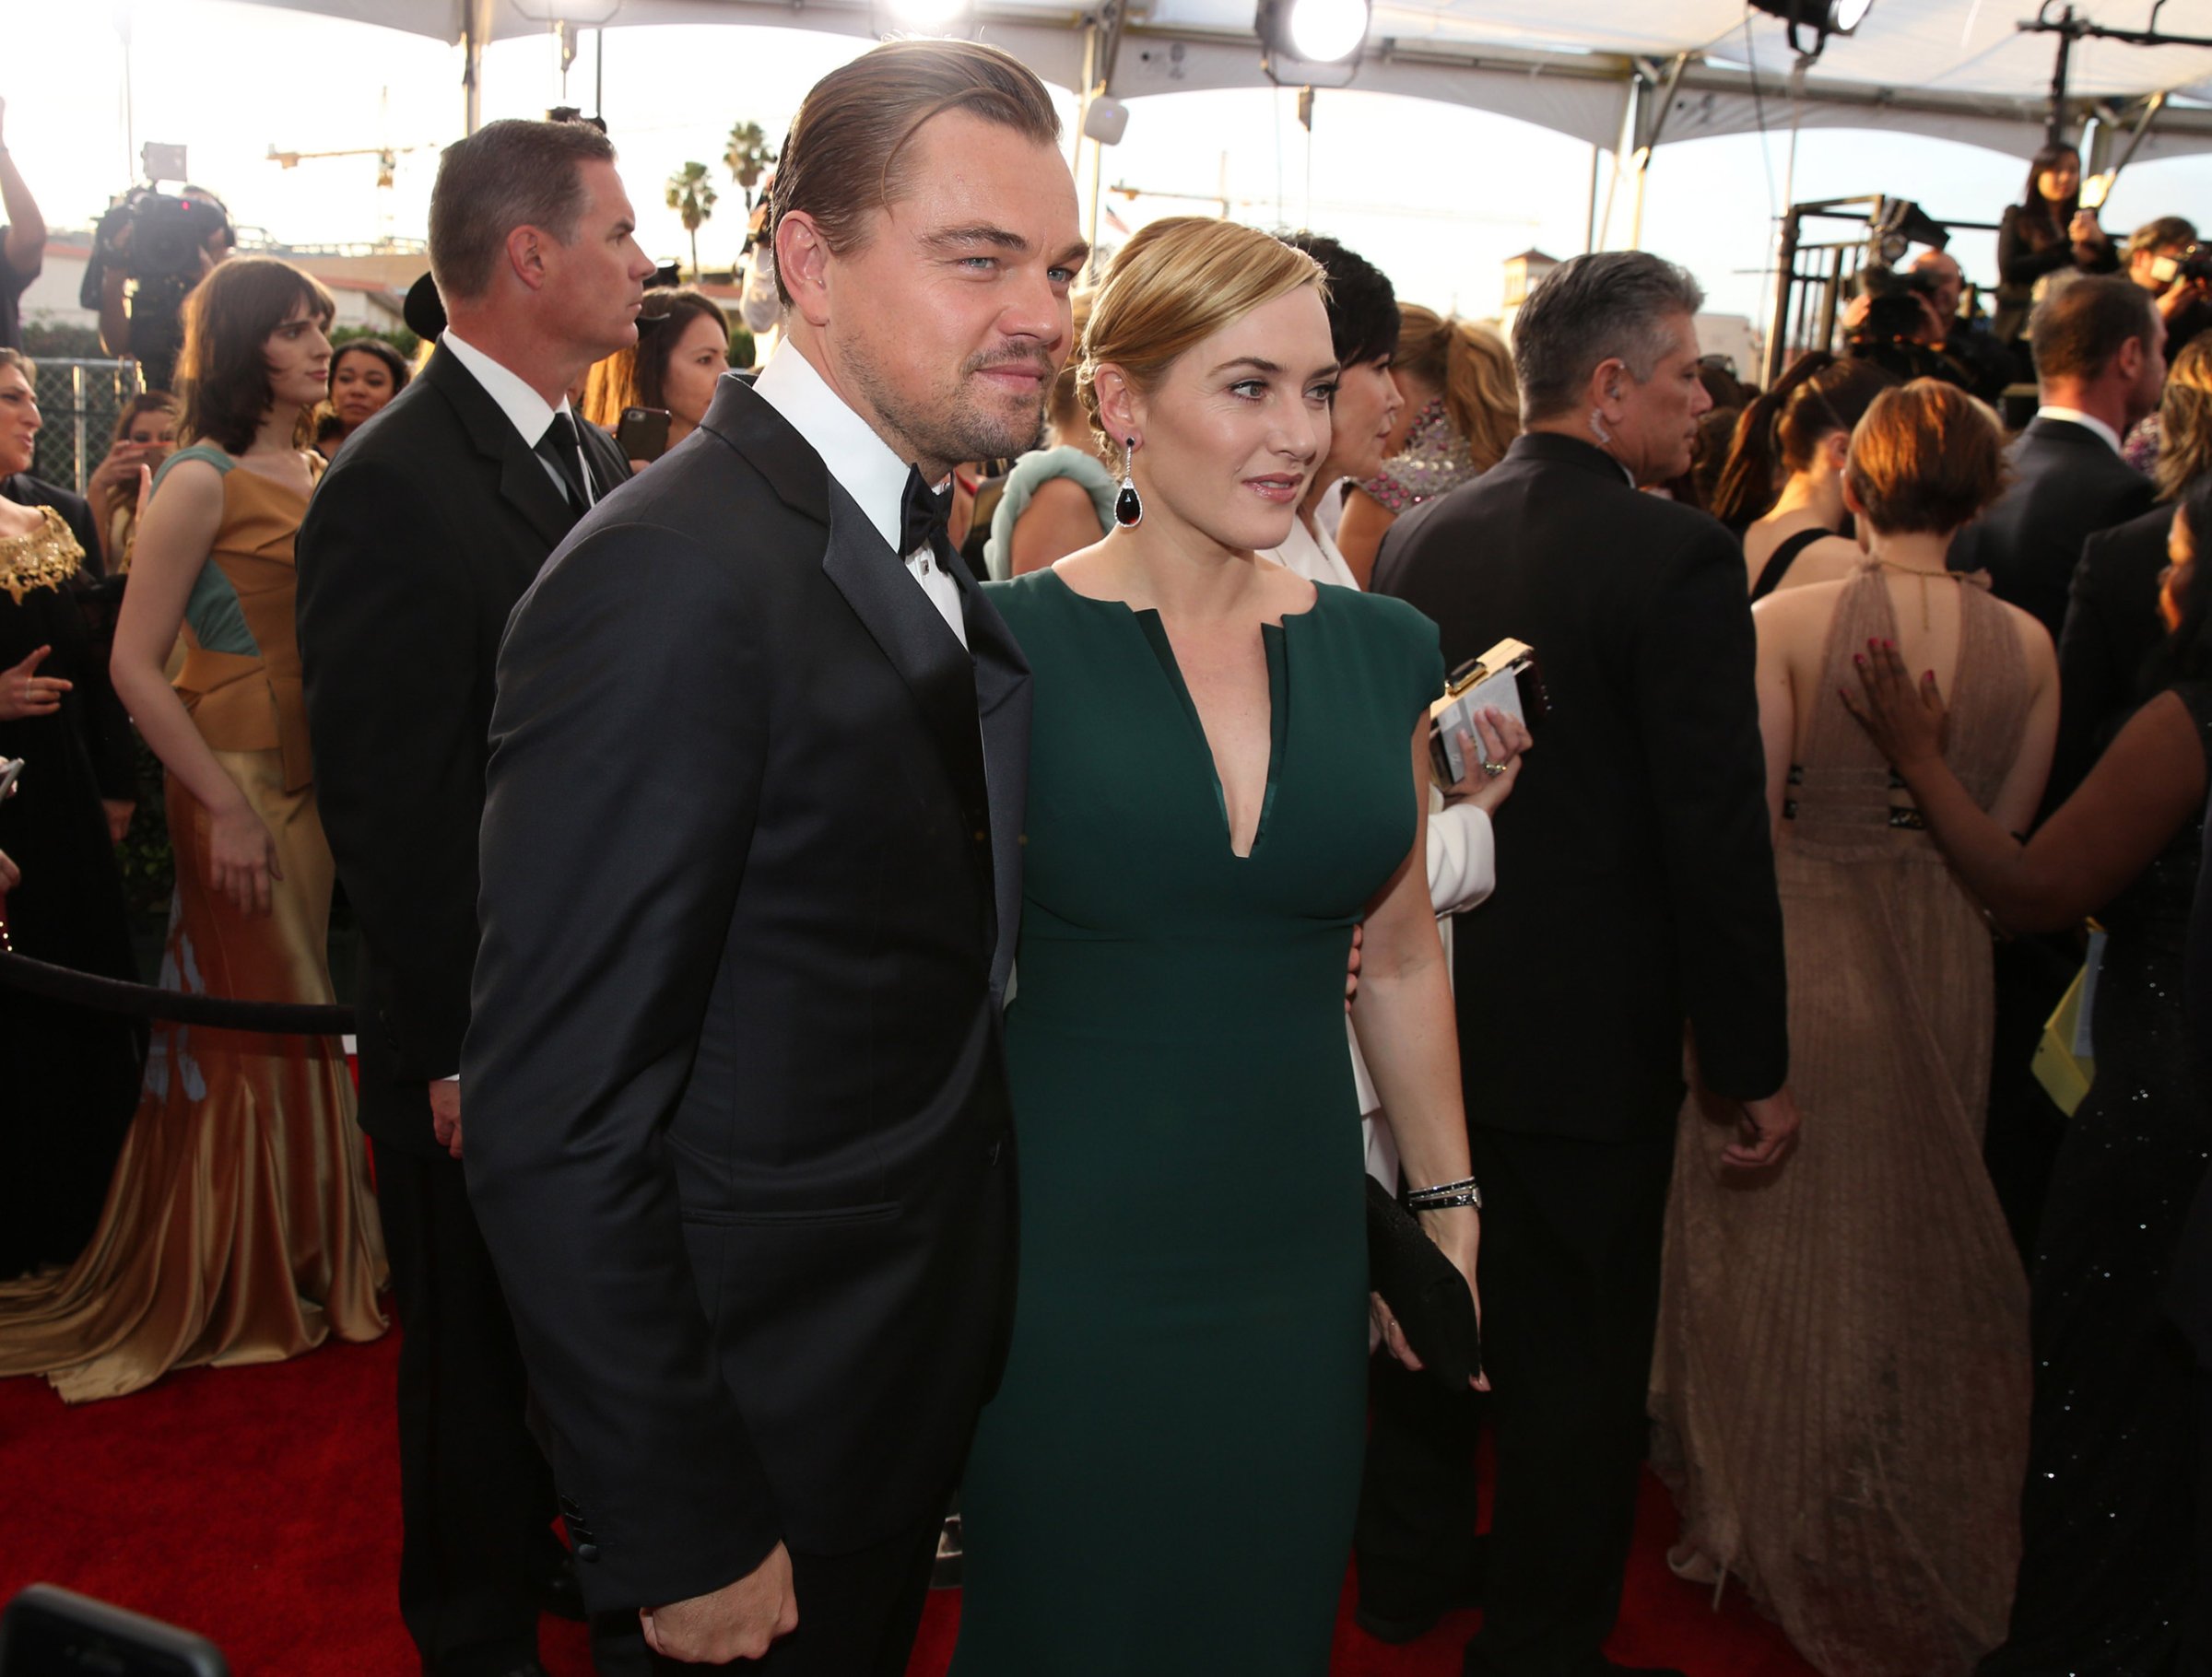 Leonardo DiCaprio and Kate Winslet arrive at the 22nd annual Screen Actors Guild Awards at the Shrine Auditorium & Expo Hall in Los Angeles, Jan. 30, 2016.